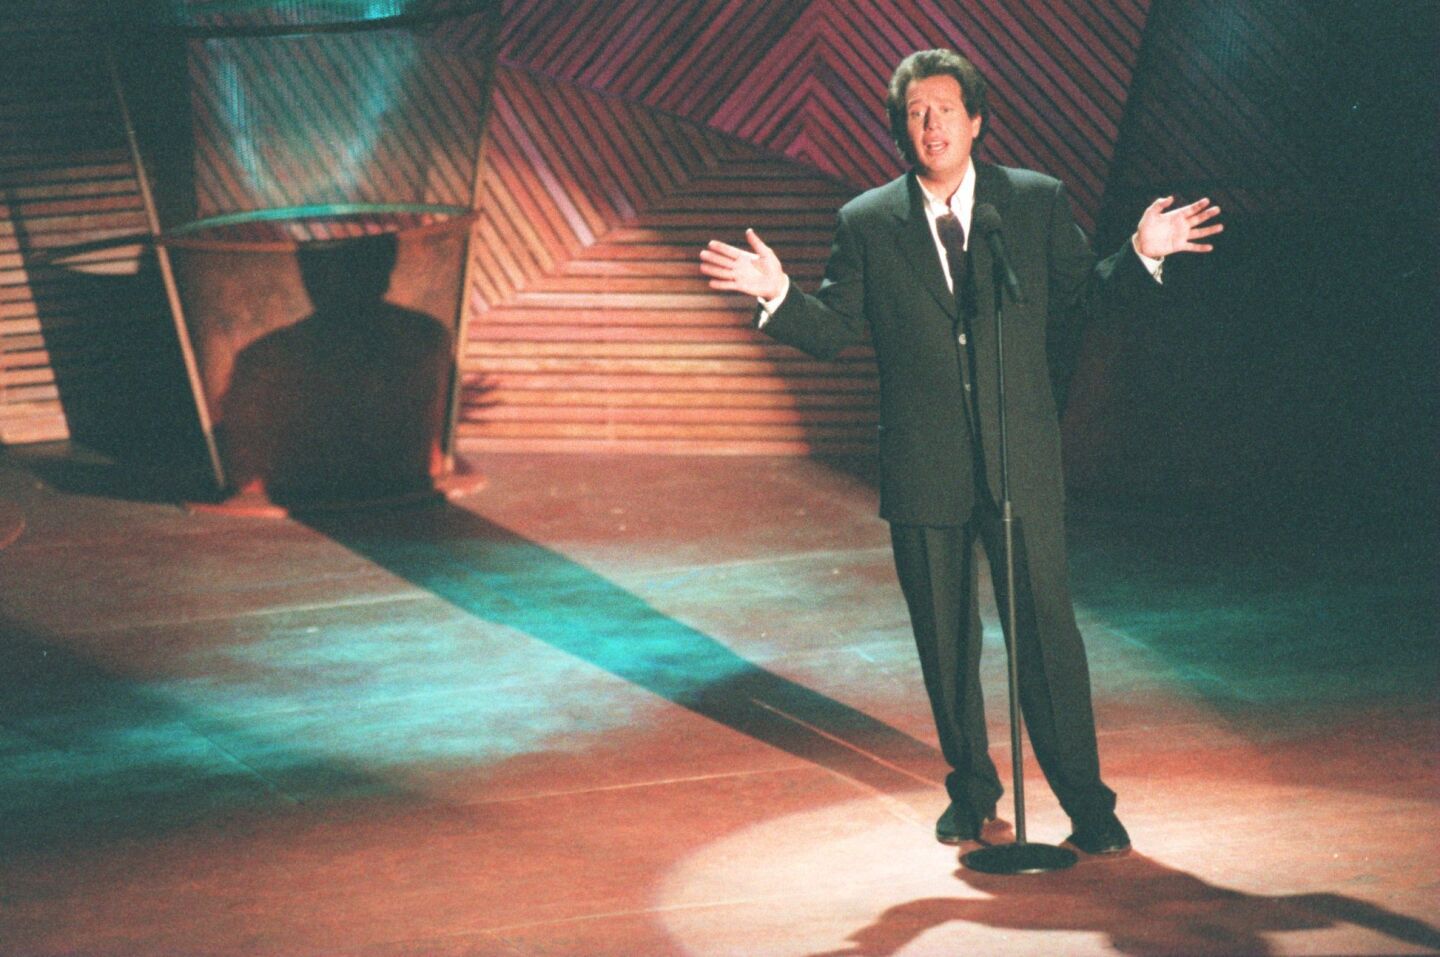 Shandling appears on stage for HBO's "The 1995 Young Comedians Special" at the Wheeler Theatre in Aspen, Colo., during the U.S. Comedy Arts Festival.